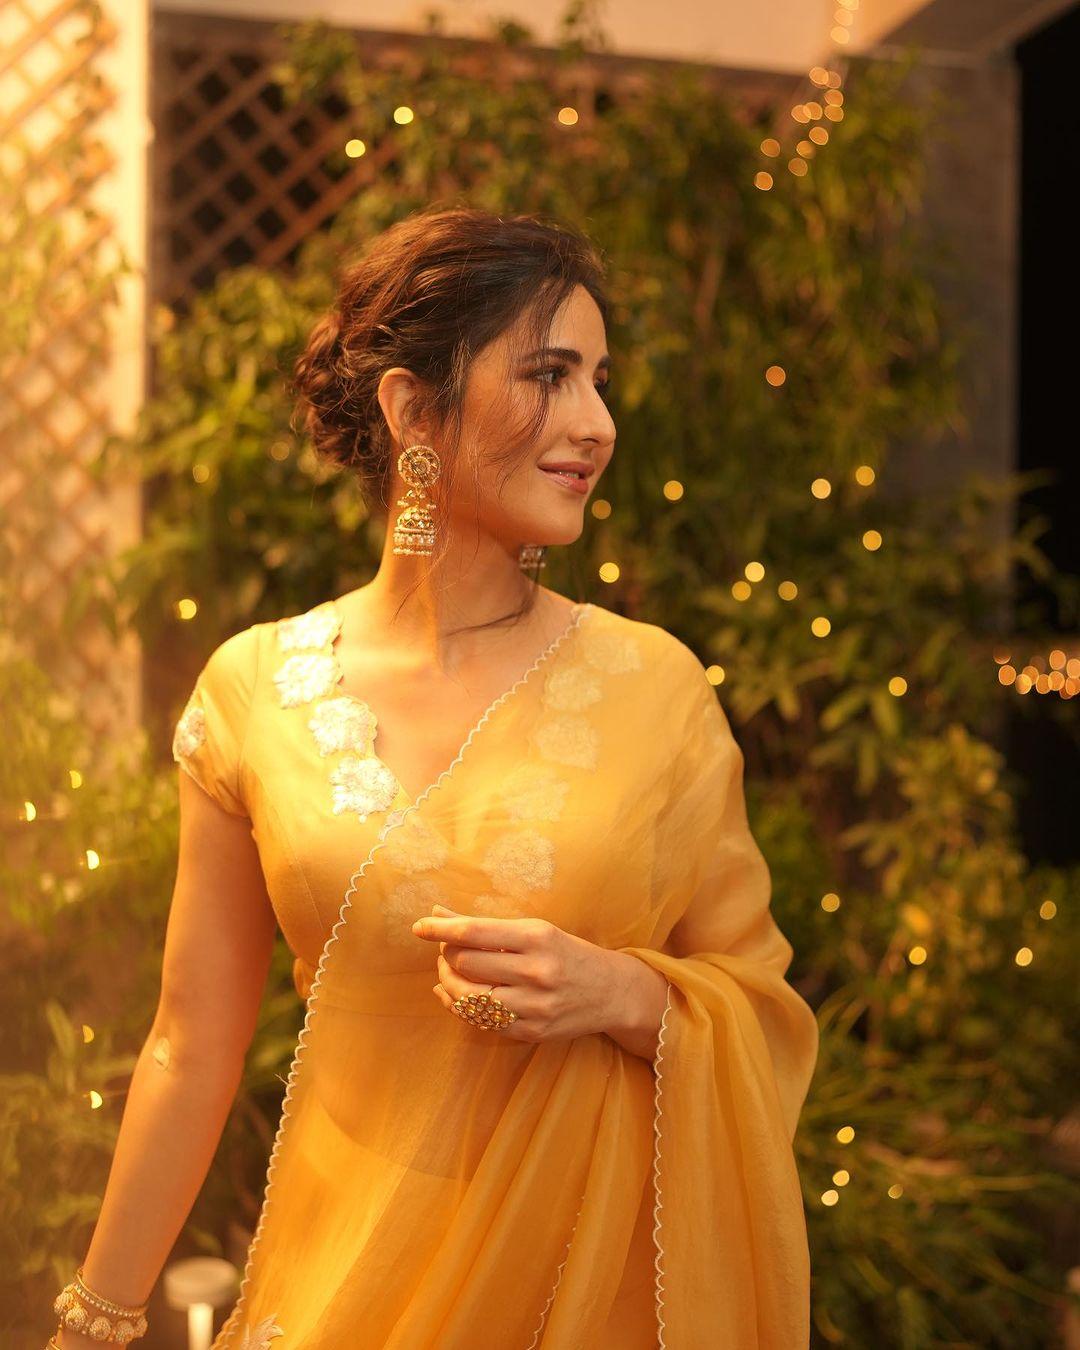 Her look was on point, with a stylish cutout blouse, a deep neckline, and chic golden jhumkas.